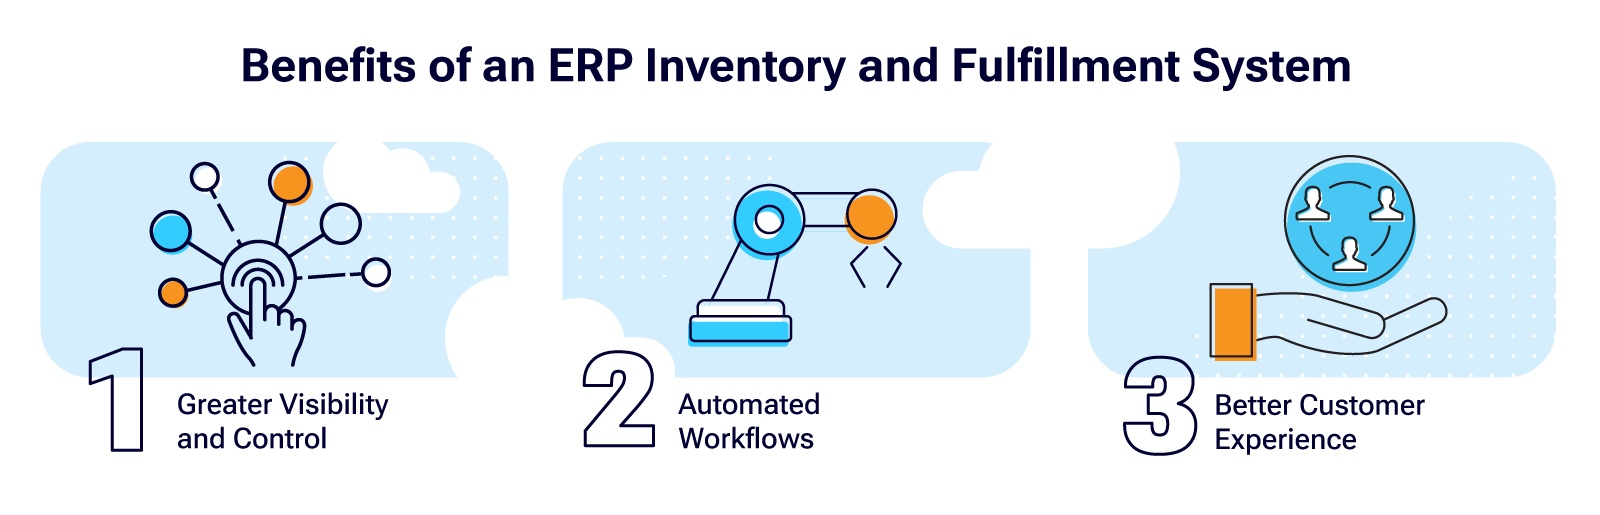 Benefits of an ERP Inventory and Fulfillment System